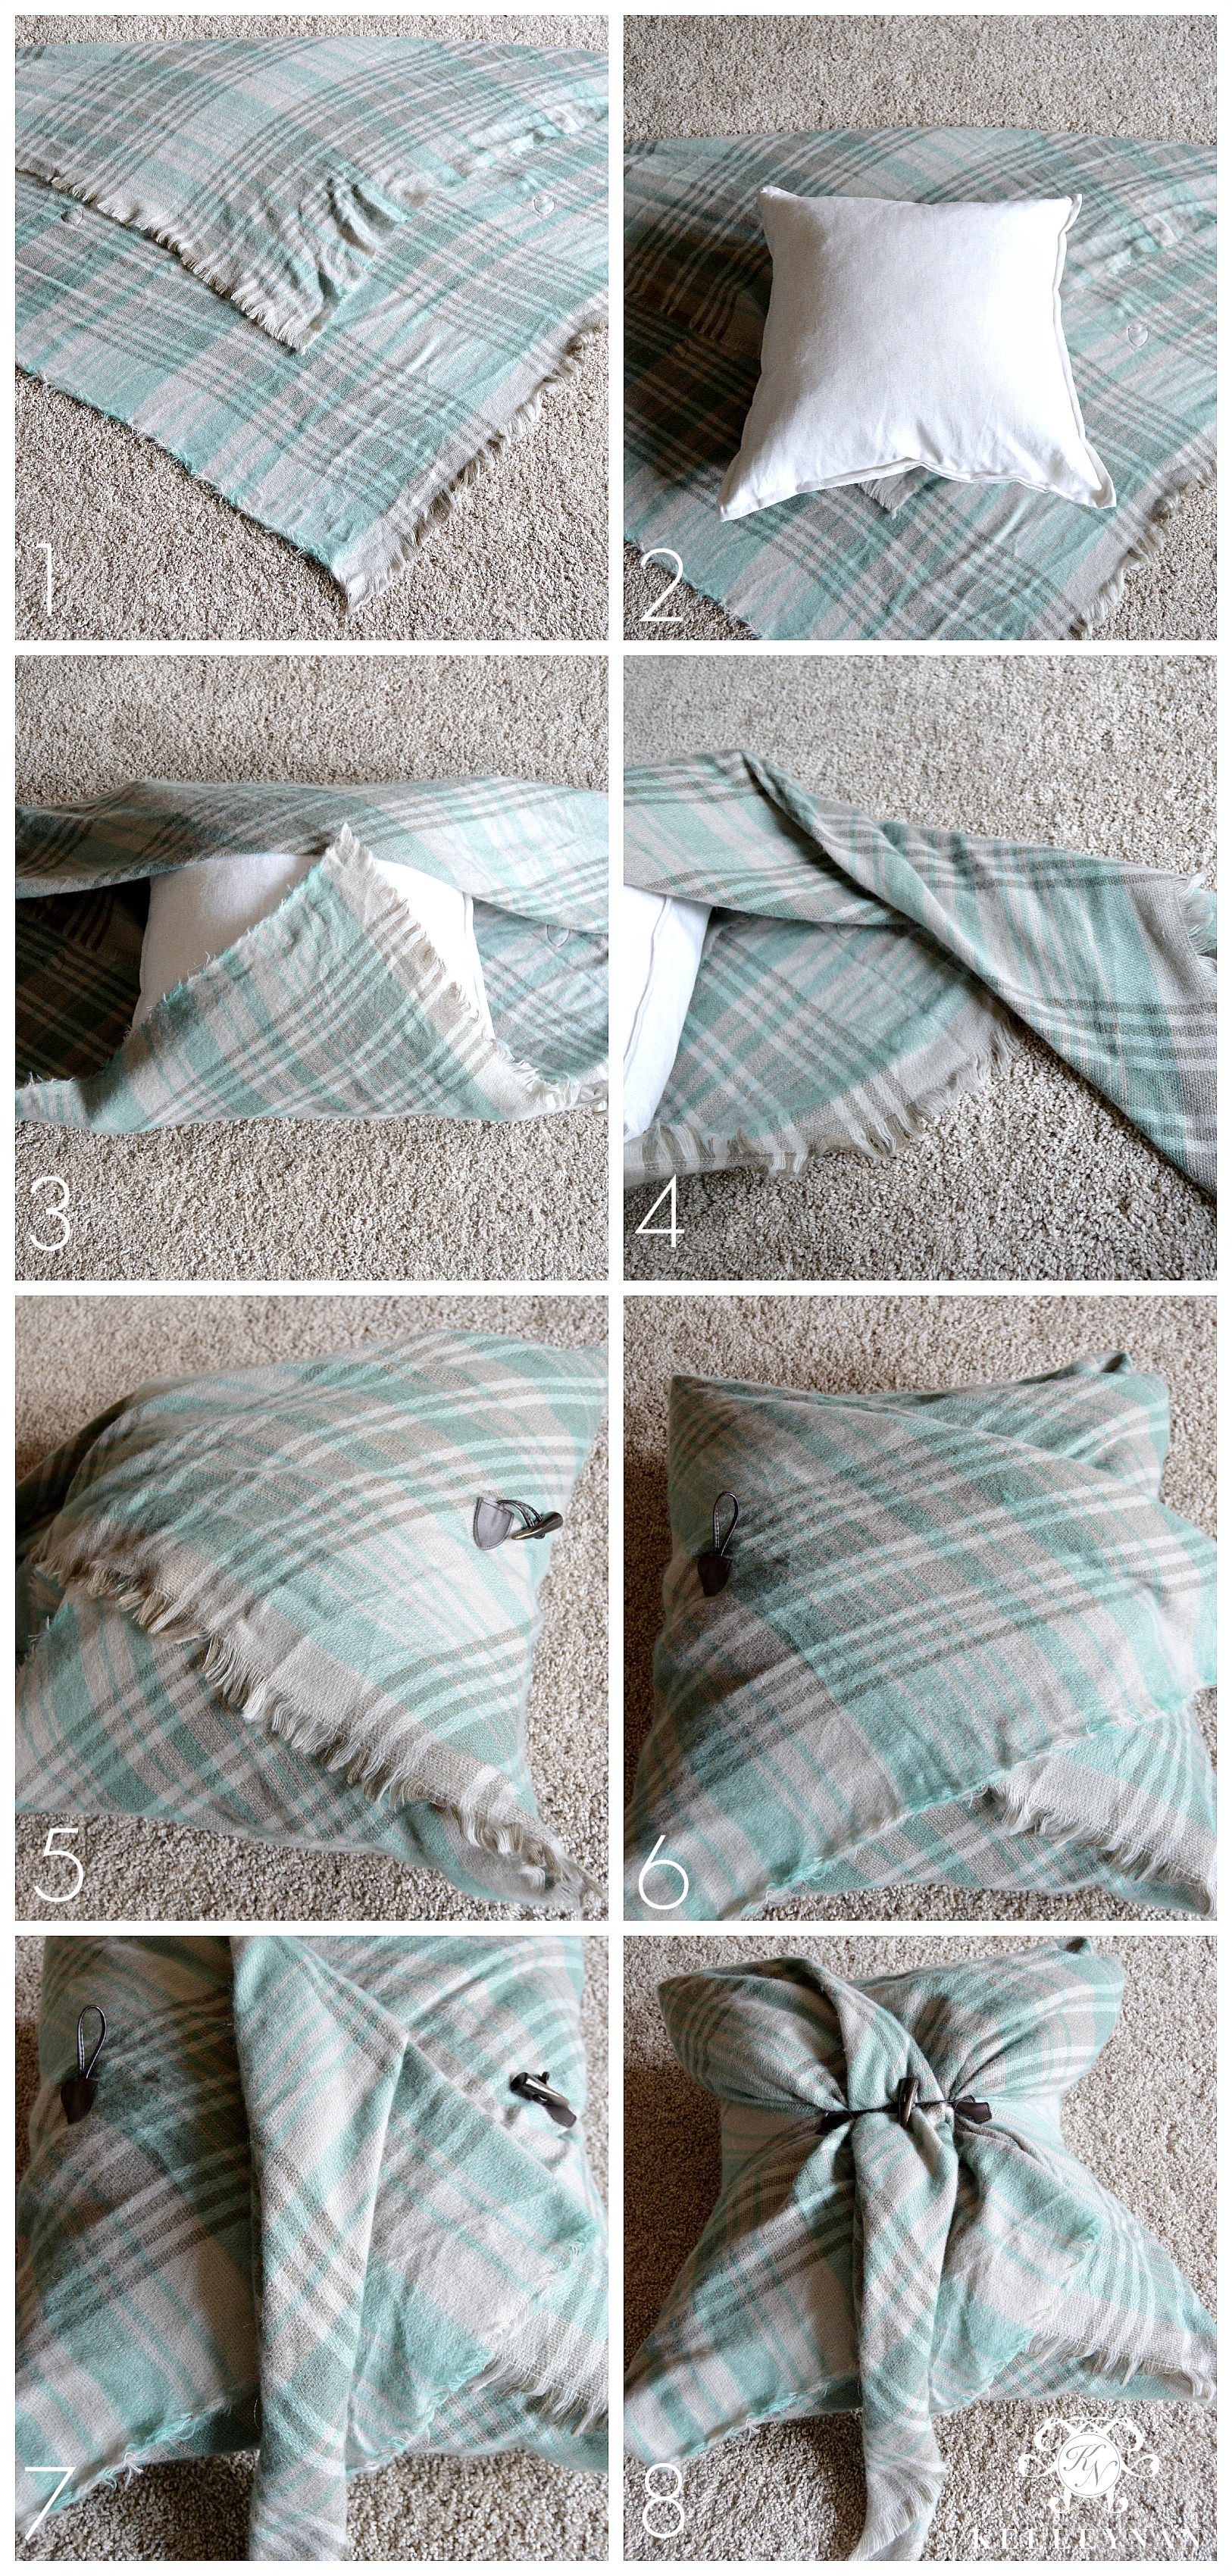 How To Make Vintage Scarf Pillow Covers: No Sewing Needed!